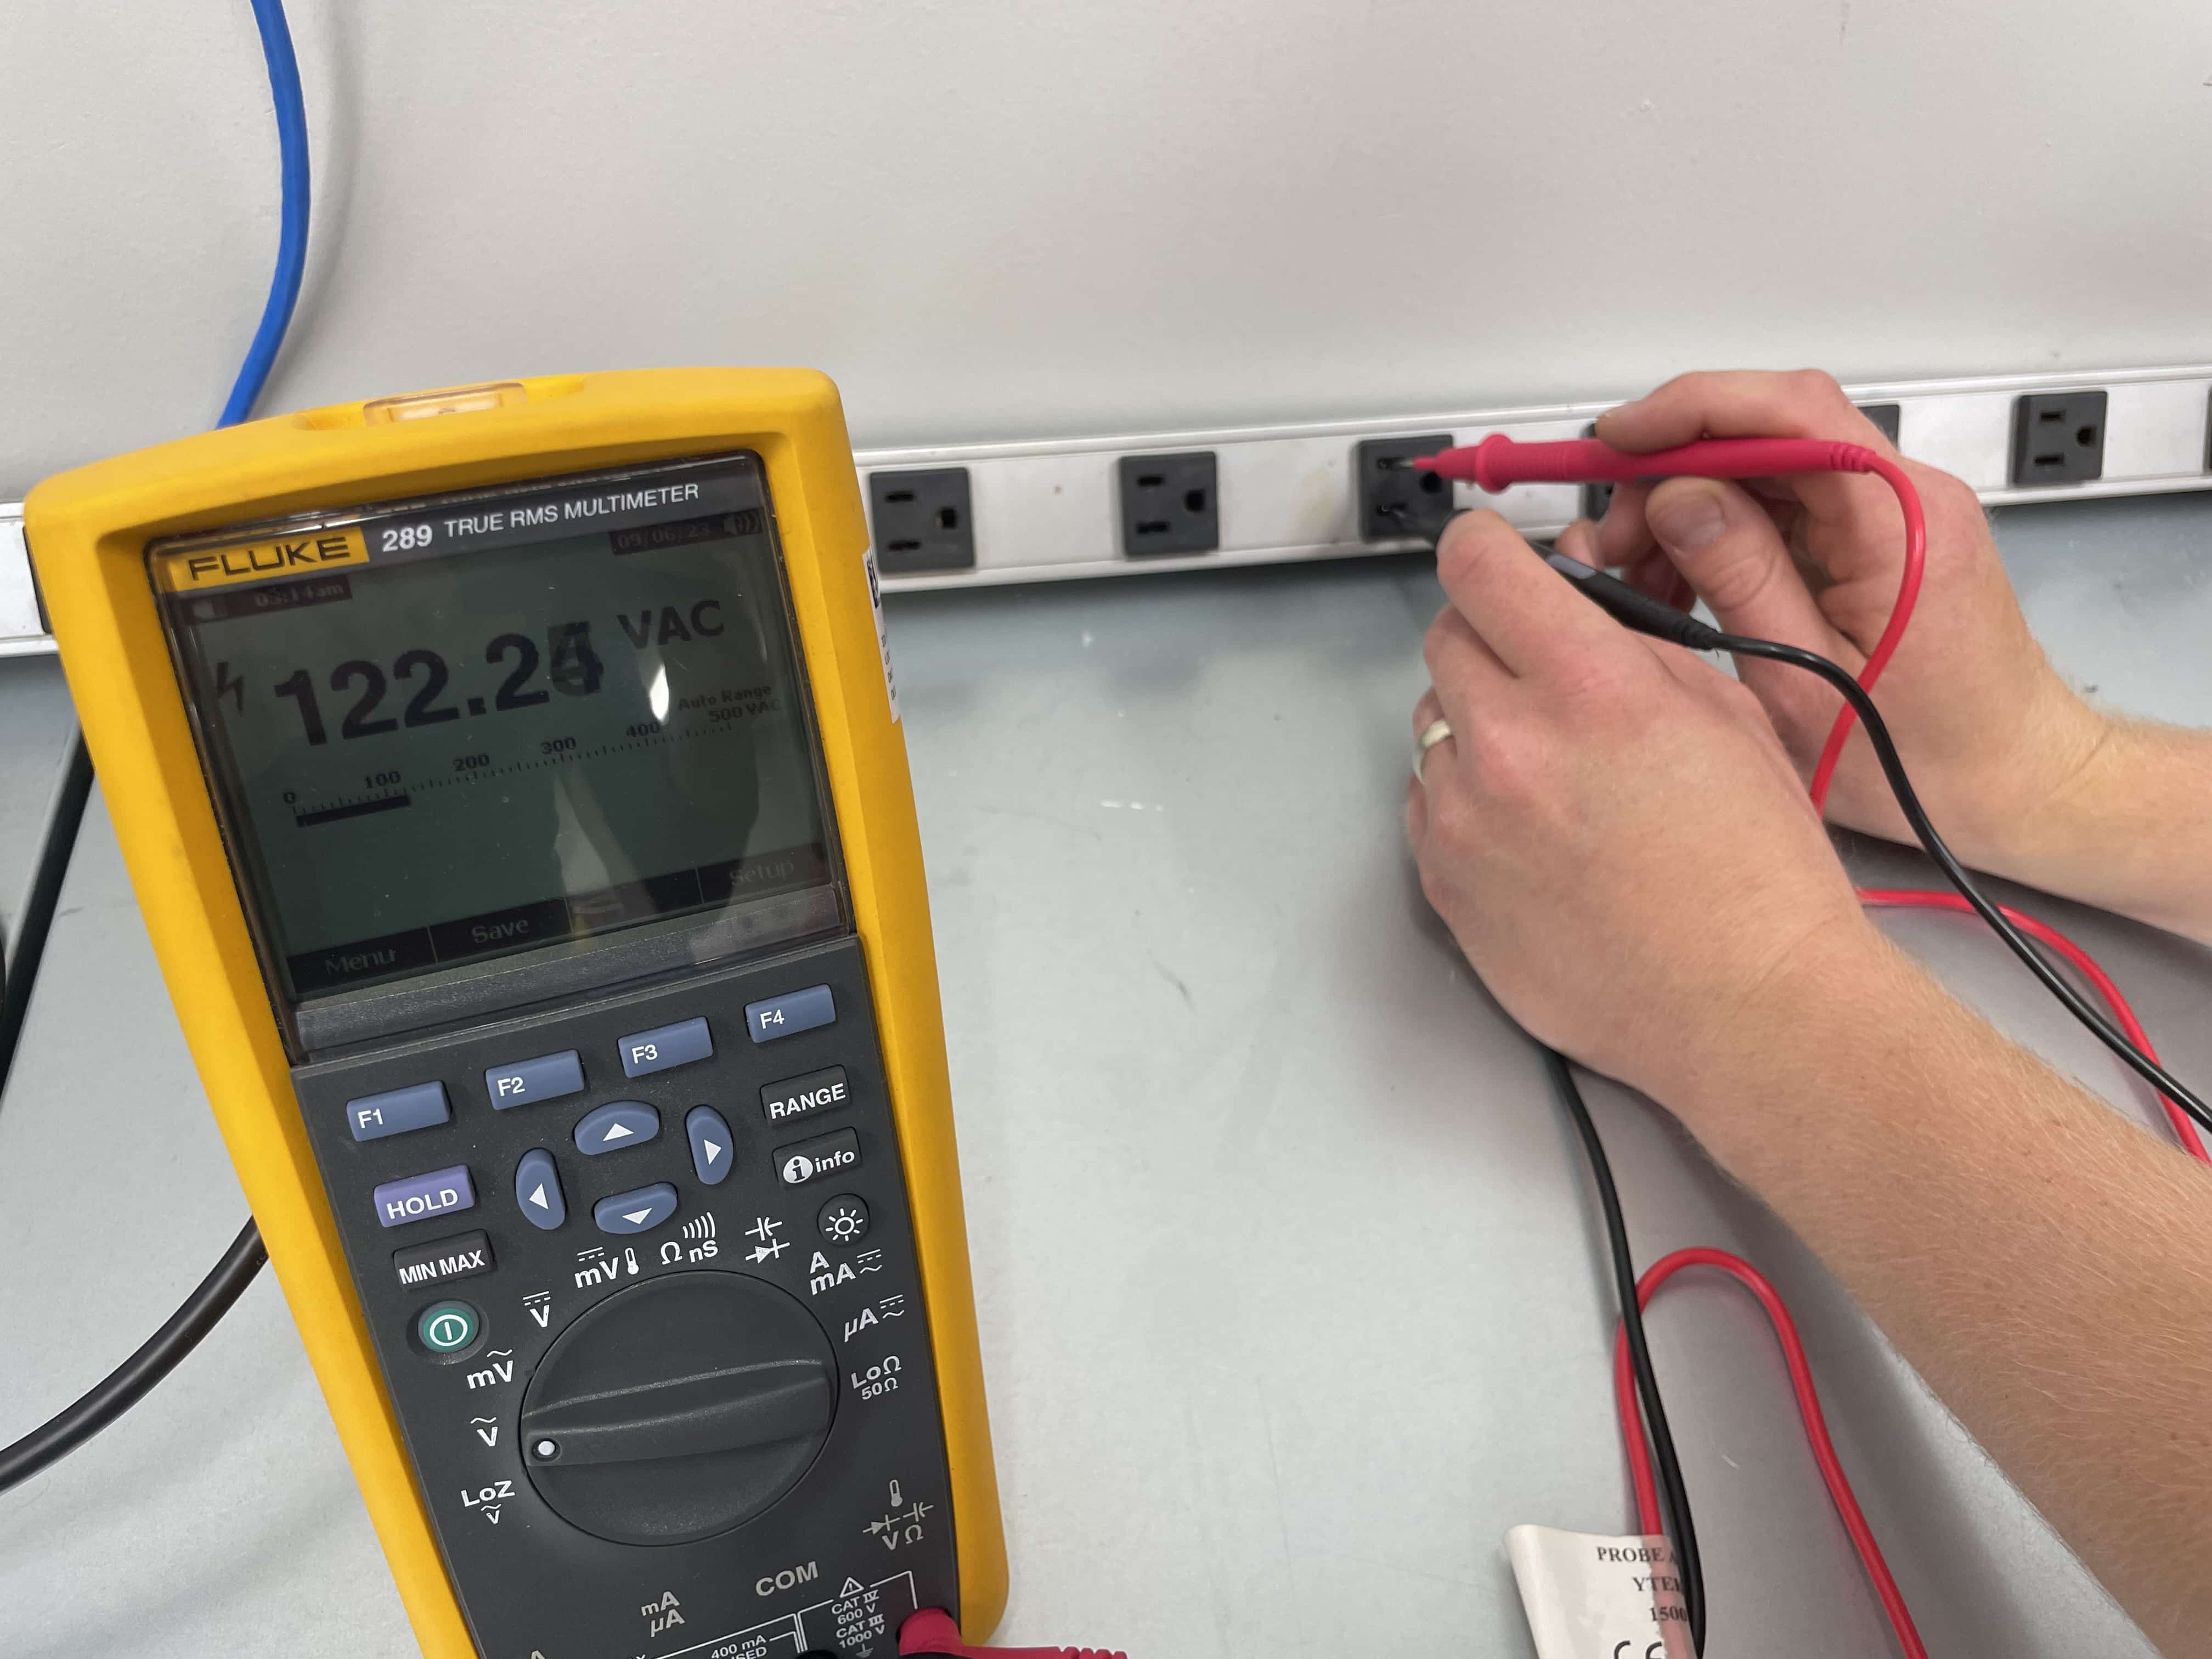 How to Use a Multimeter - Testing an Outlet With a Multimeter